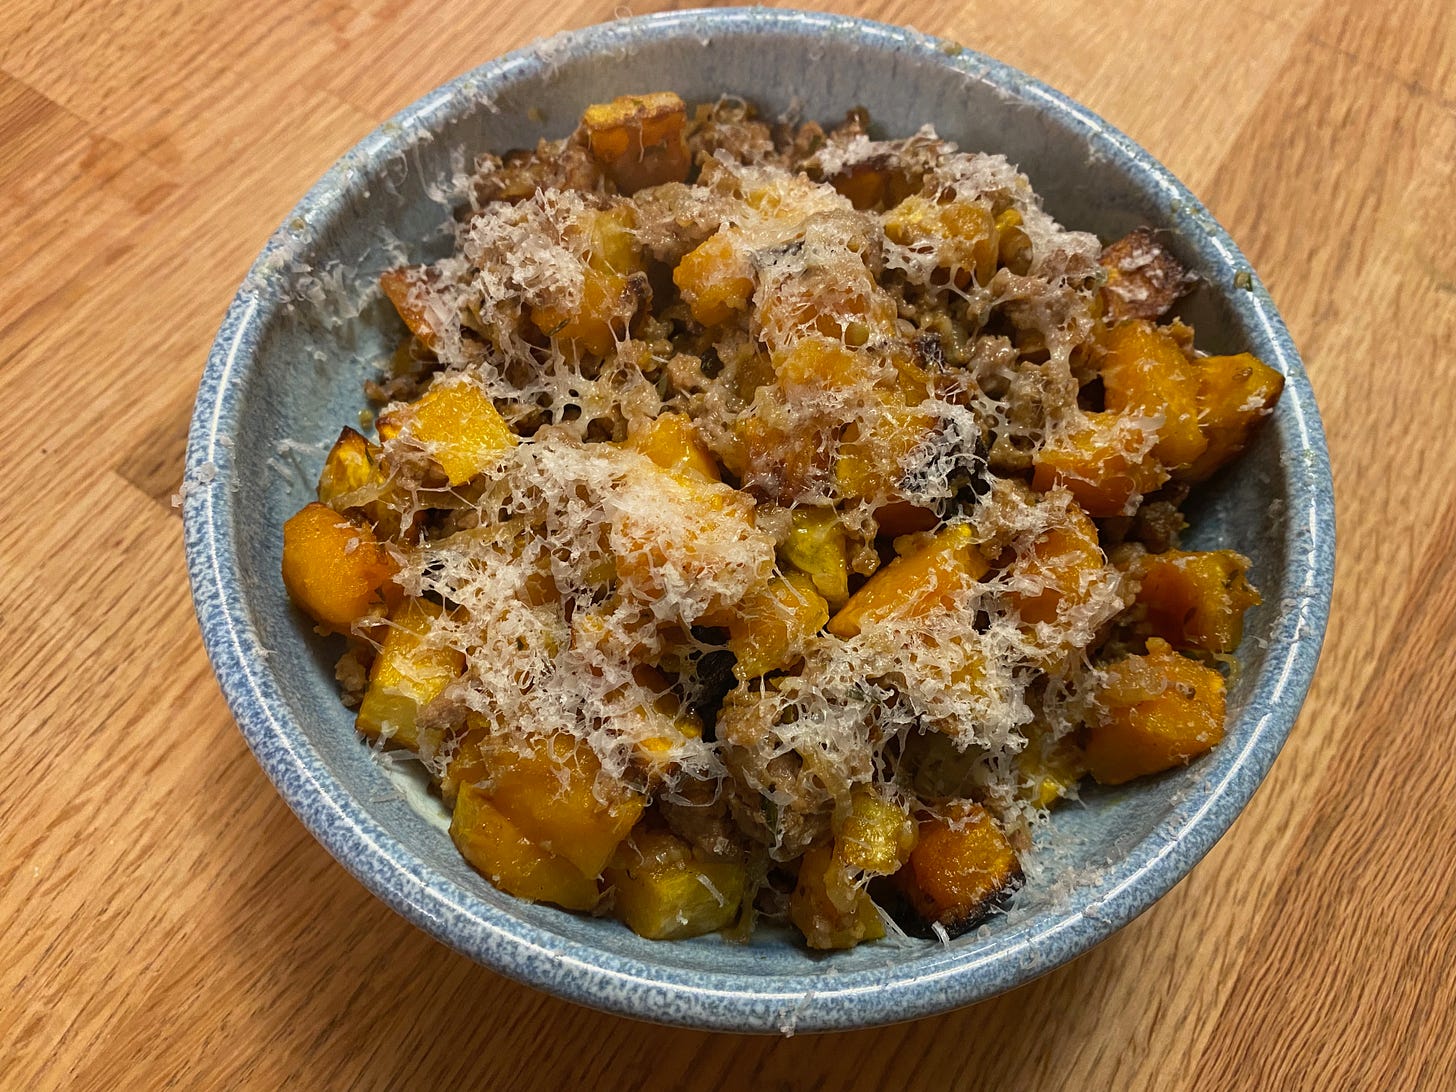 A blue ceramic bowl full of cubbed roasted butternut squash and ground pork covered in grated Parmesan.